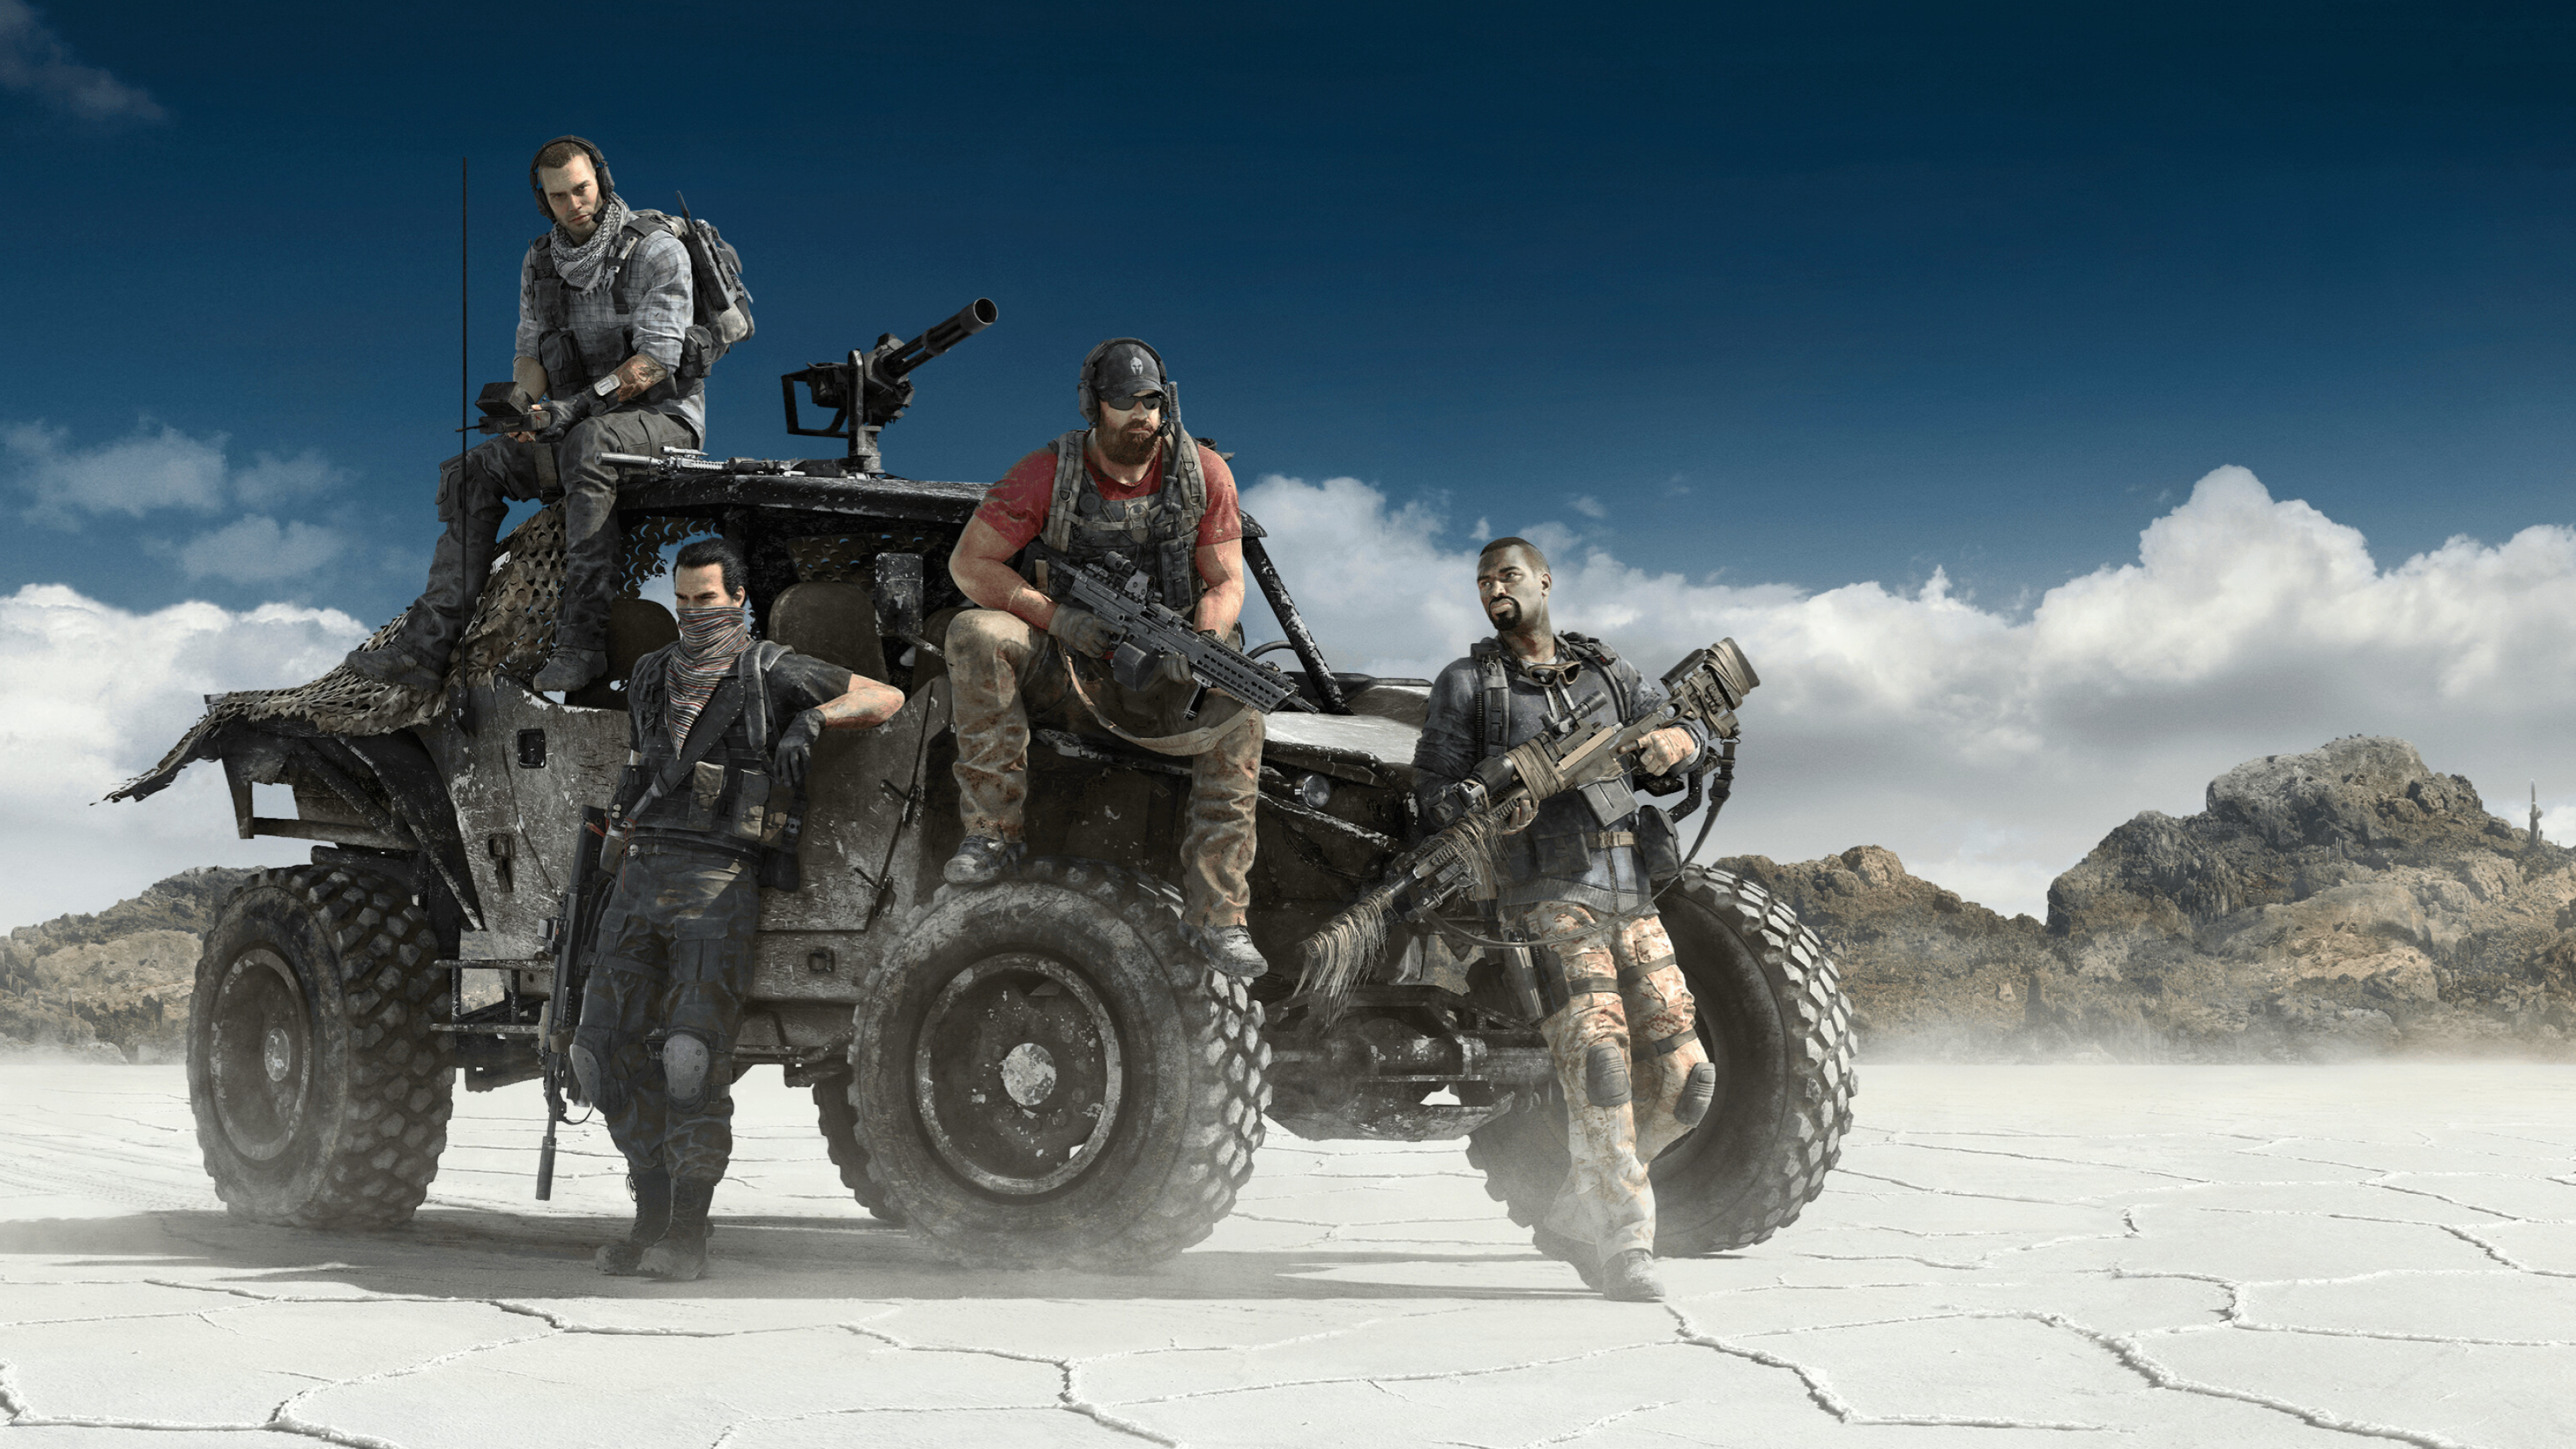 Ghost Recon: Wildlands: A third-person tactical shooter video game developed by Ubisoft Paris in collaboration with Ubisoft Bucharest. 3840x2160 4K Wallpaper.